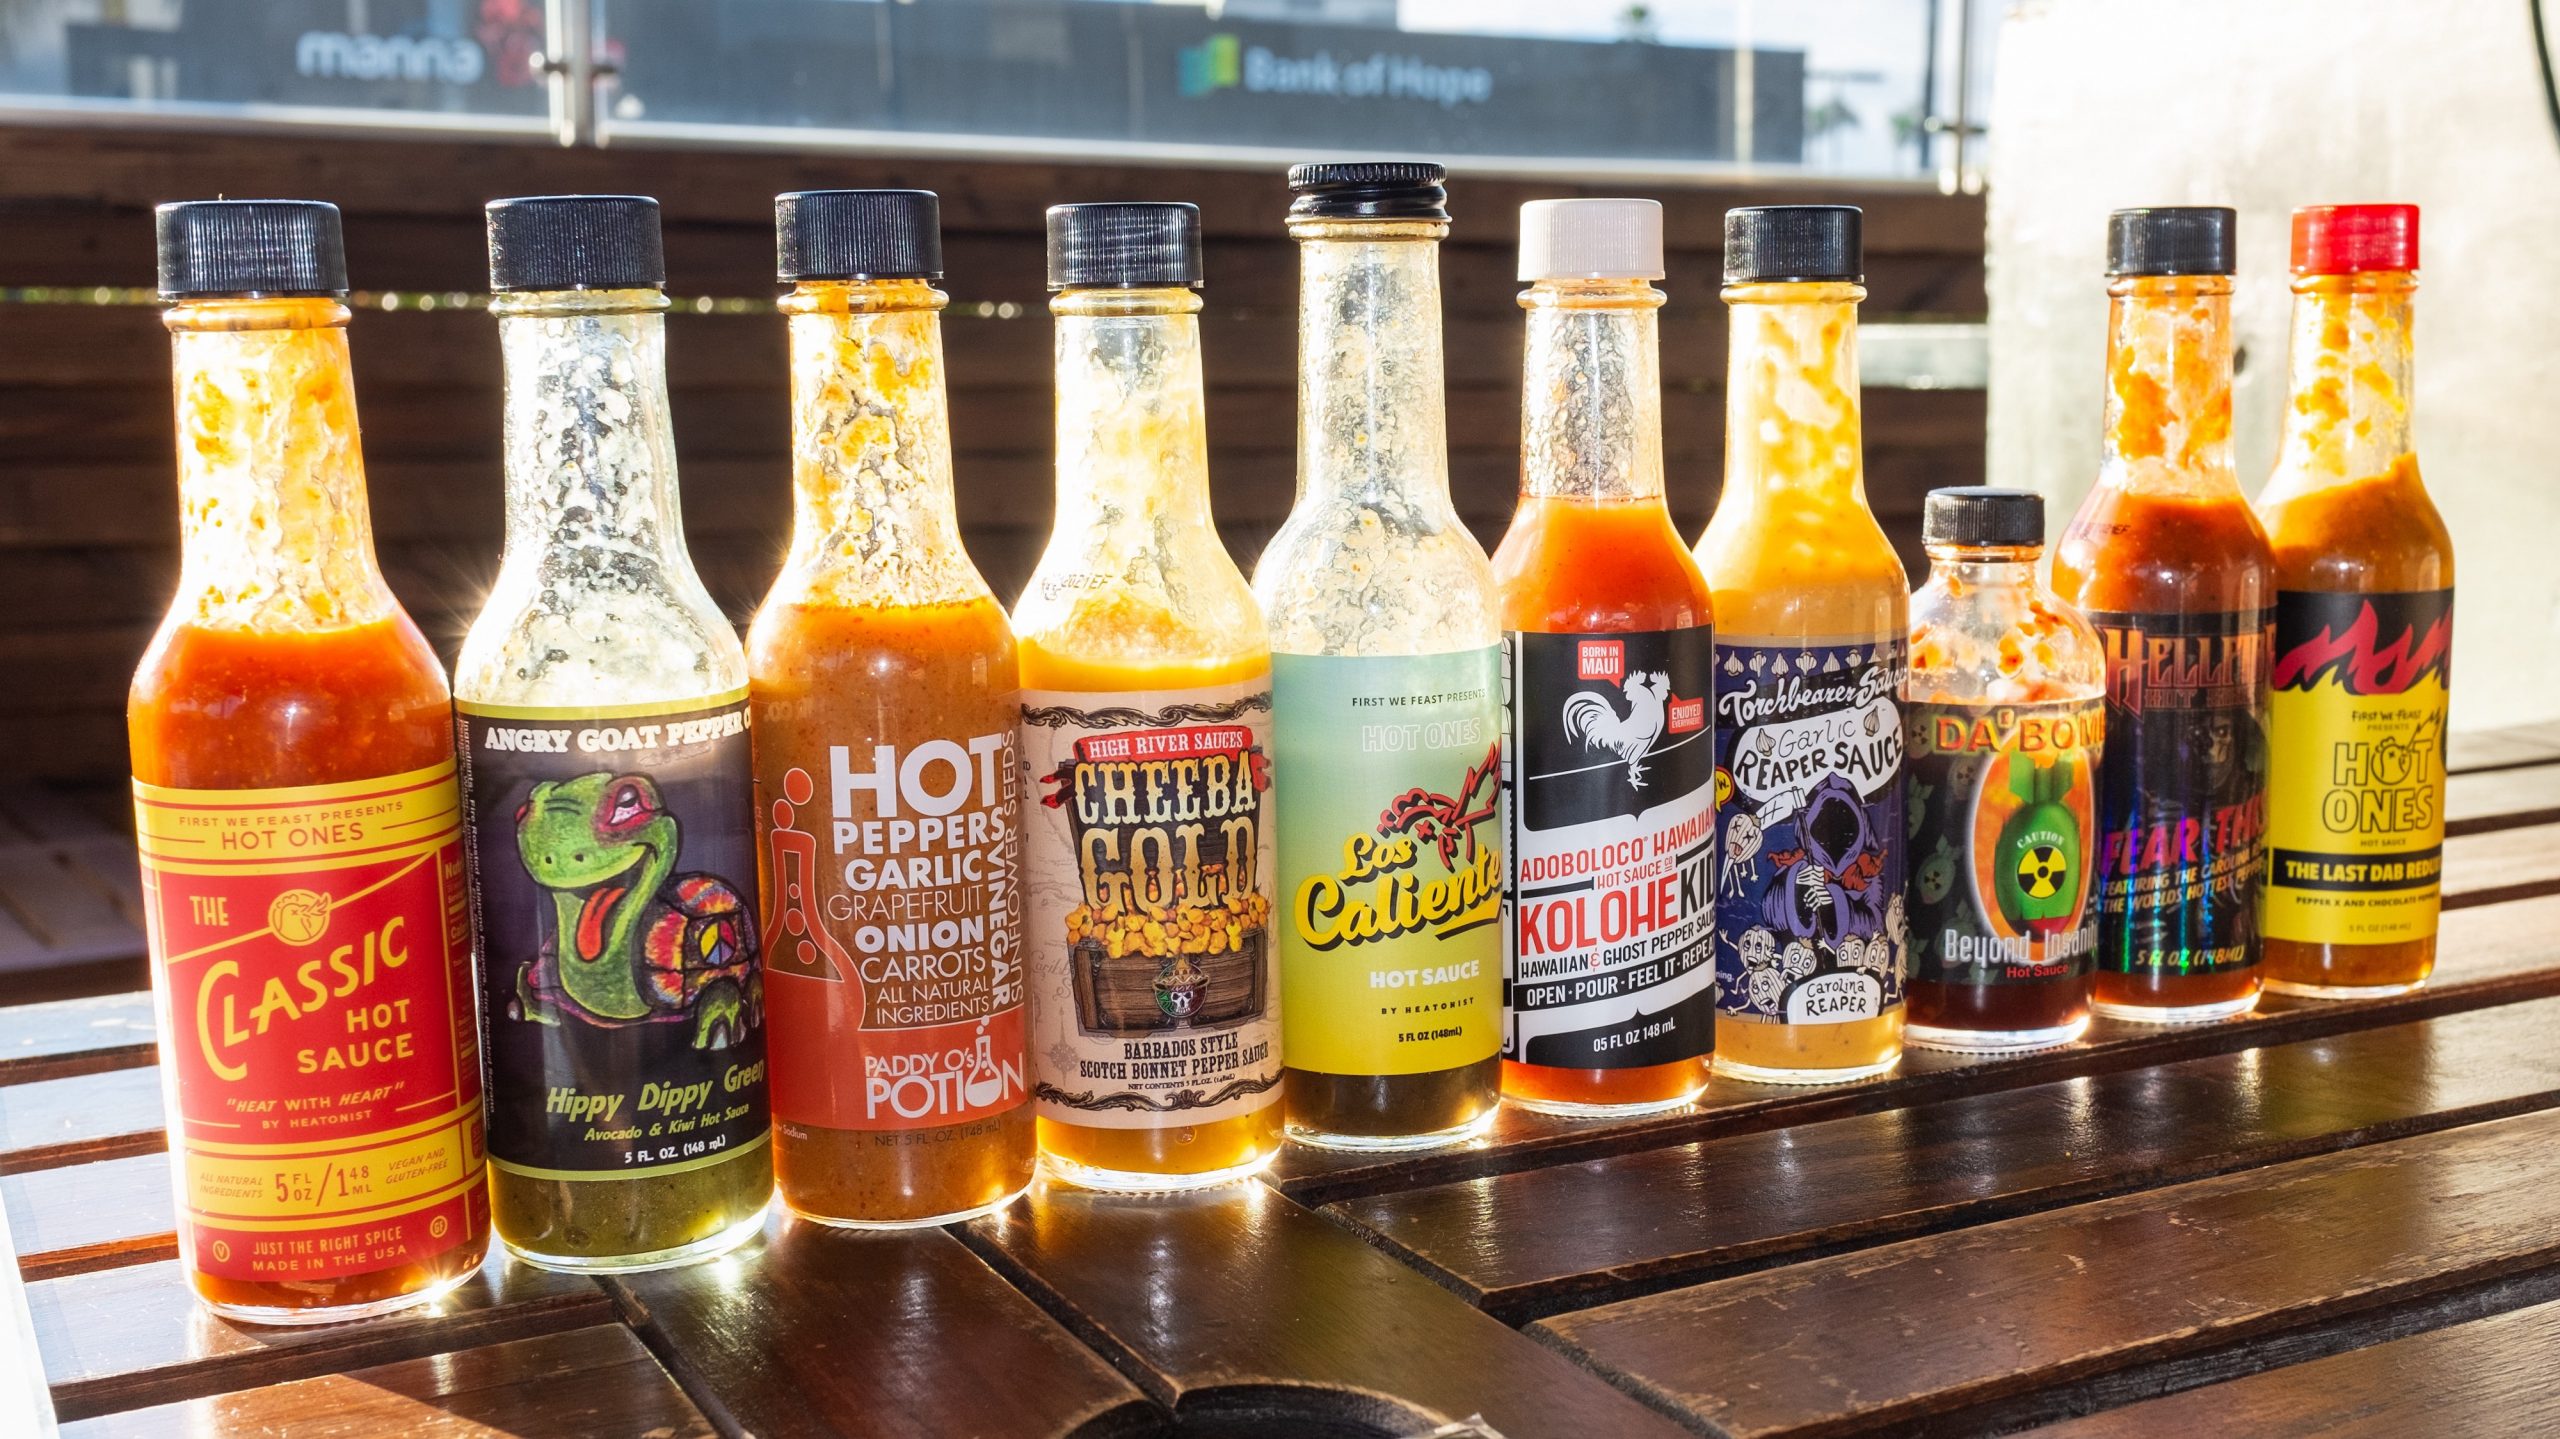 A taste of the Hot Ones season 8 hot sauces